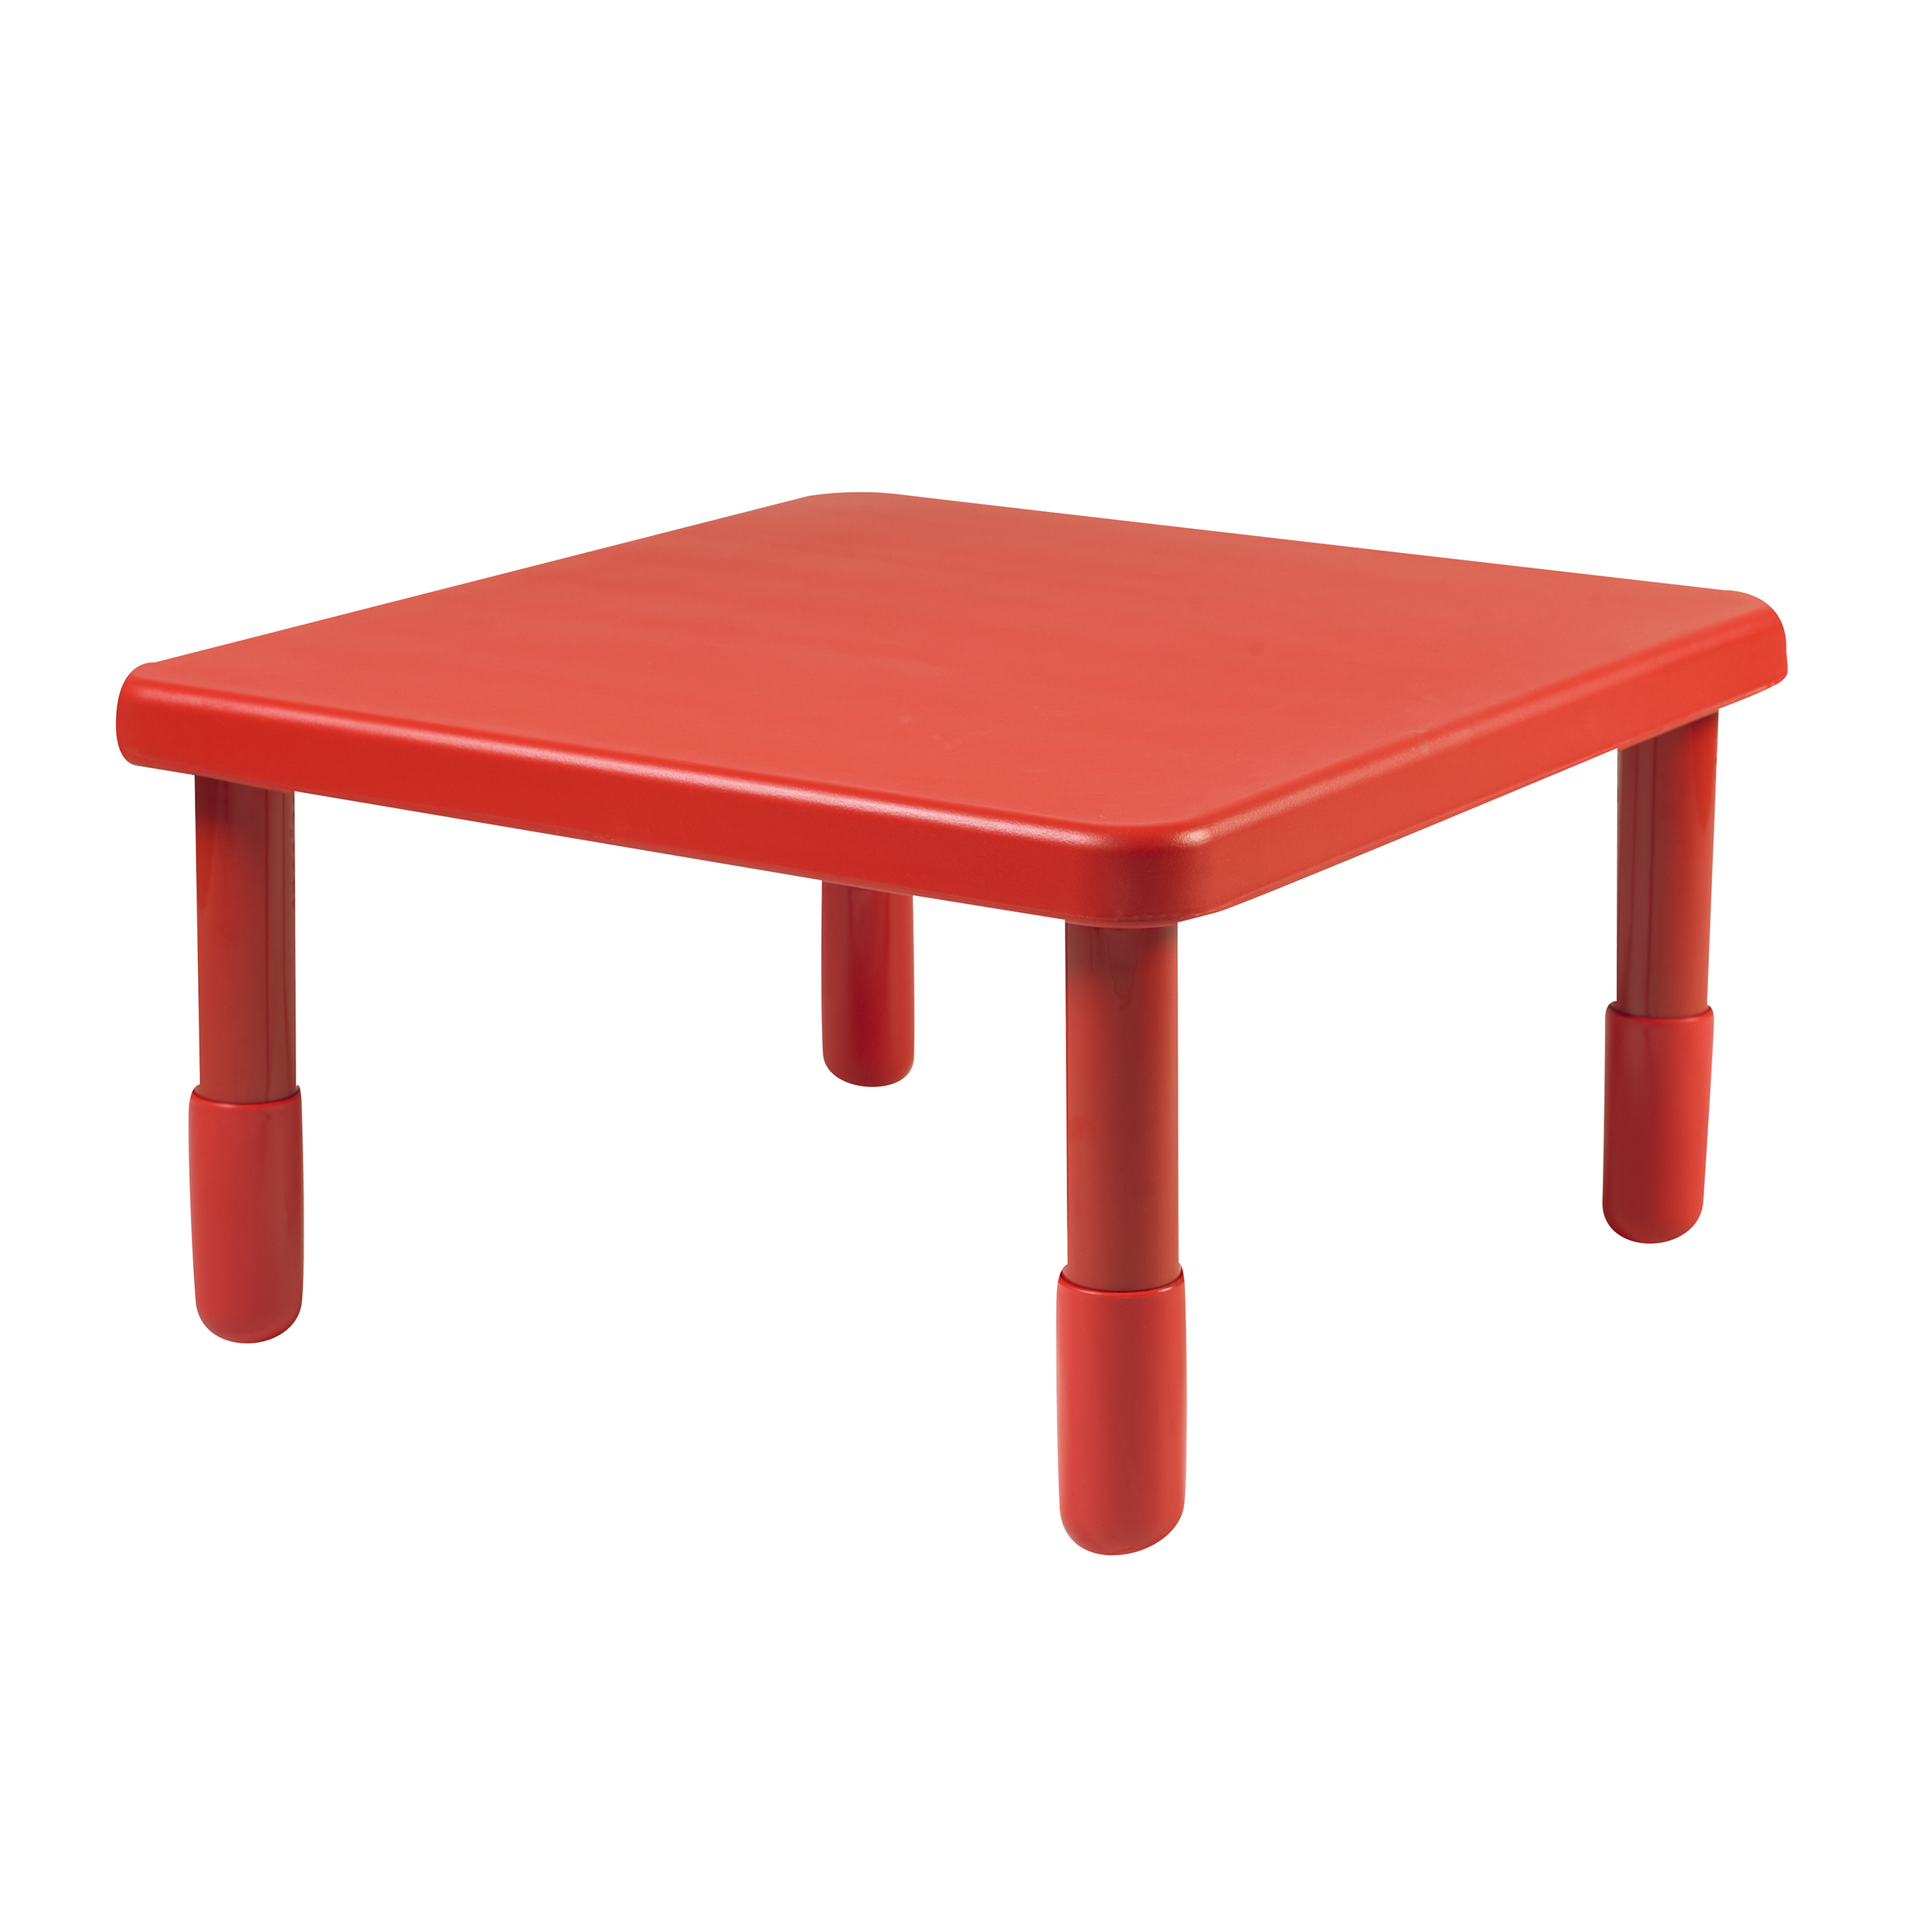 Value 71 cm  Square Table - Candy Apple Red with 40,5 cm  Legs